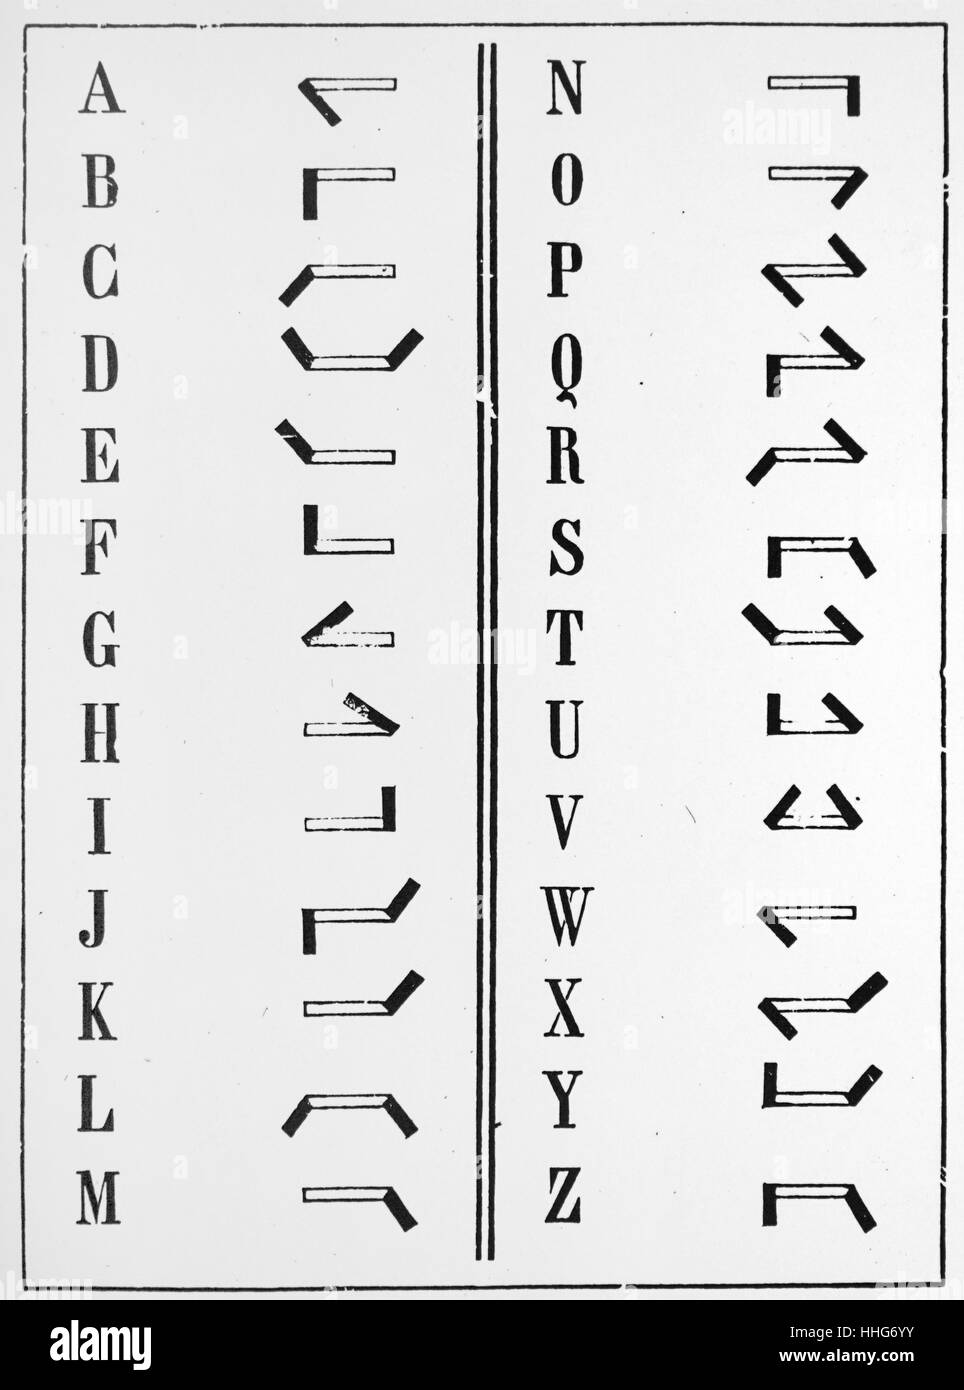 Alphabet of Foy and Breguet's needle telegraph; used on the Paris Rouen line from 1845. This was designed to use the Chappe semaphore system on an electric telegraph. 1891. Stock Photo